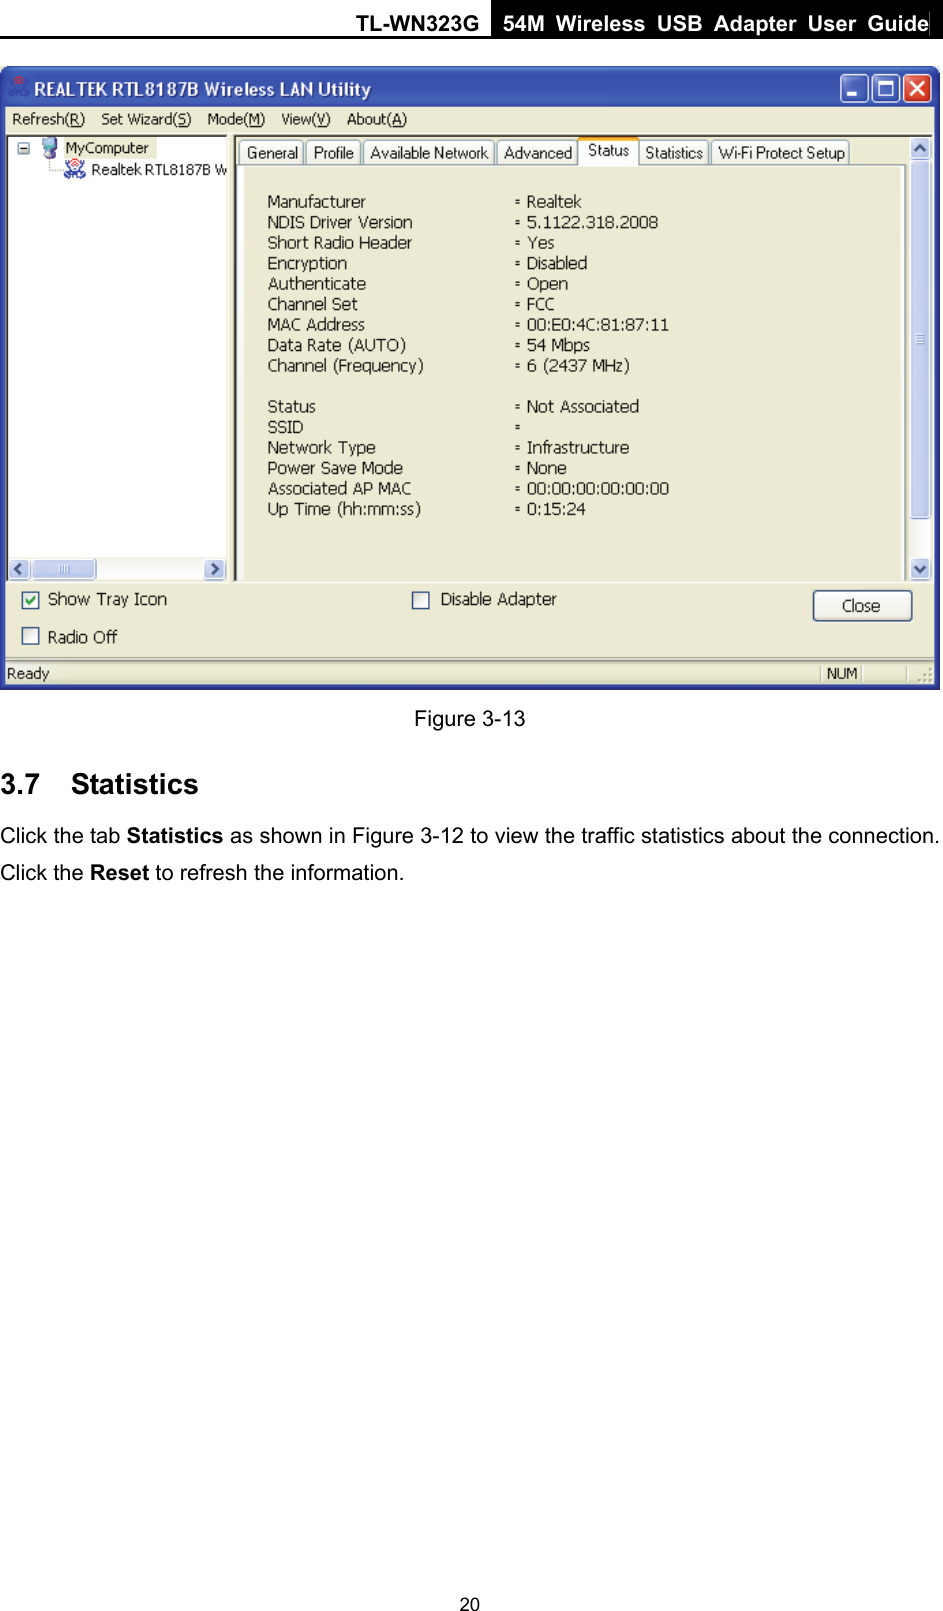 TL-WN323G 54M Wireless USB Adapter User Guide   20 Figure 3-13 3.7  Statistics Click the tab Statistics as shown in Figure 3-12 to view the traffic statistics about the connection. Click the Reset to refresh the information. 